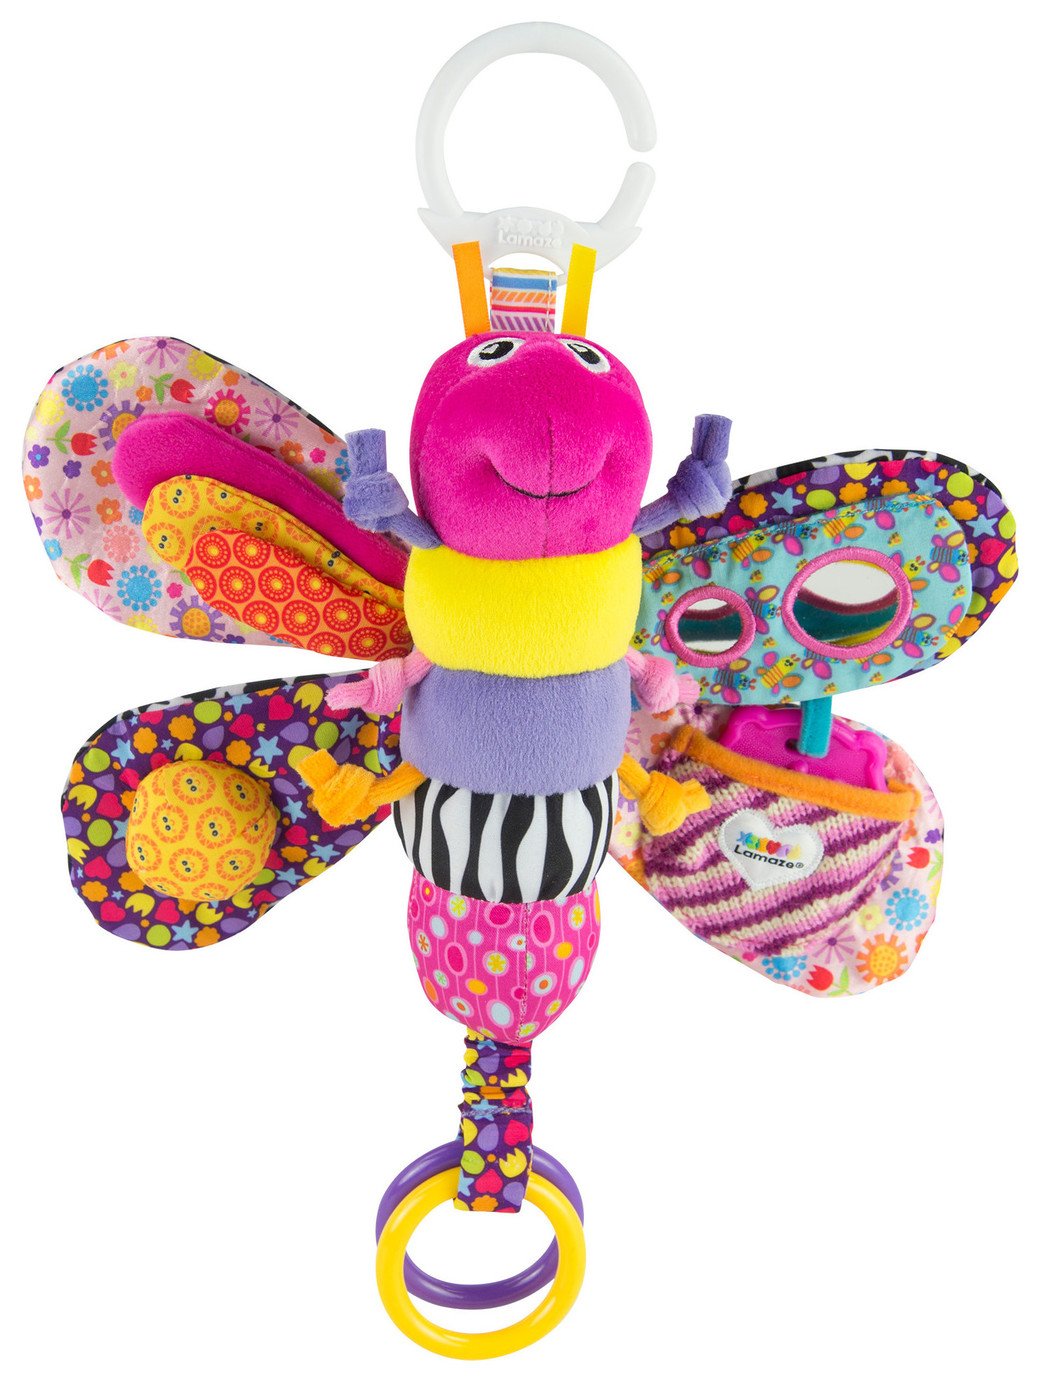 Lamaze Fifi the Pink Firefly Review